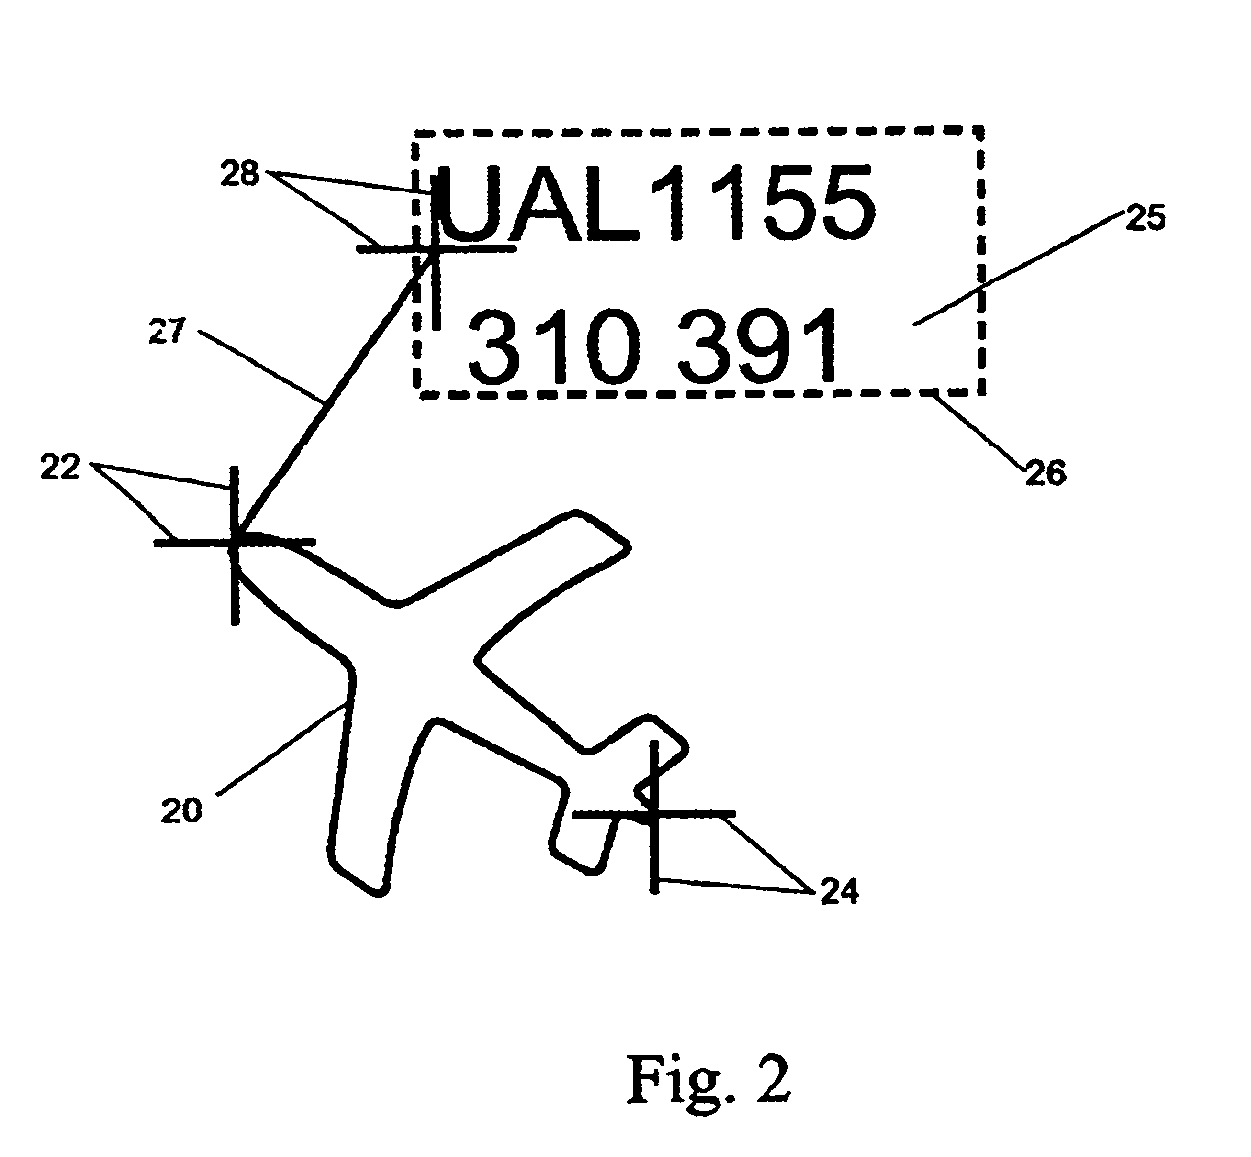 System and method for automatic placement of labels for interactive graphics applications